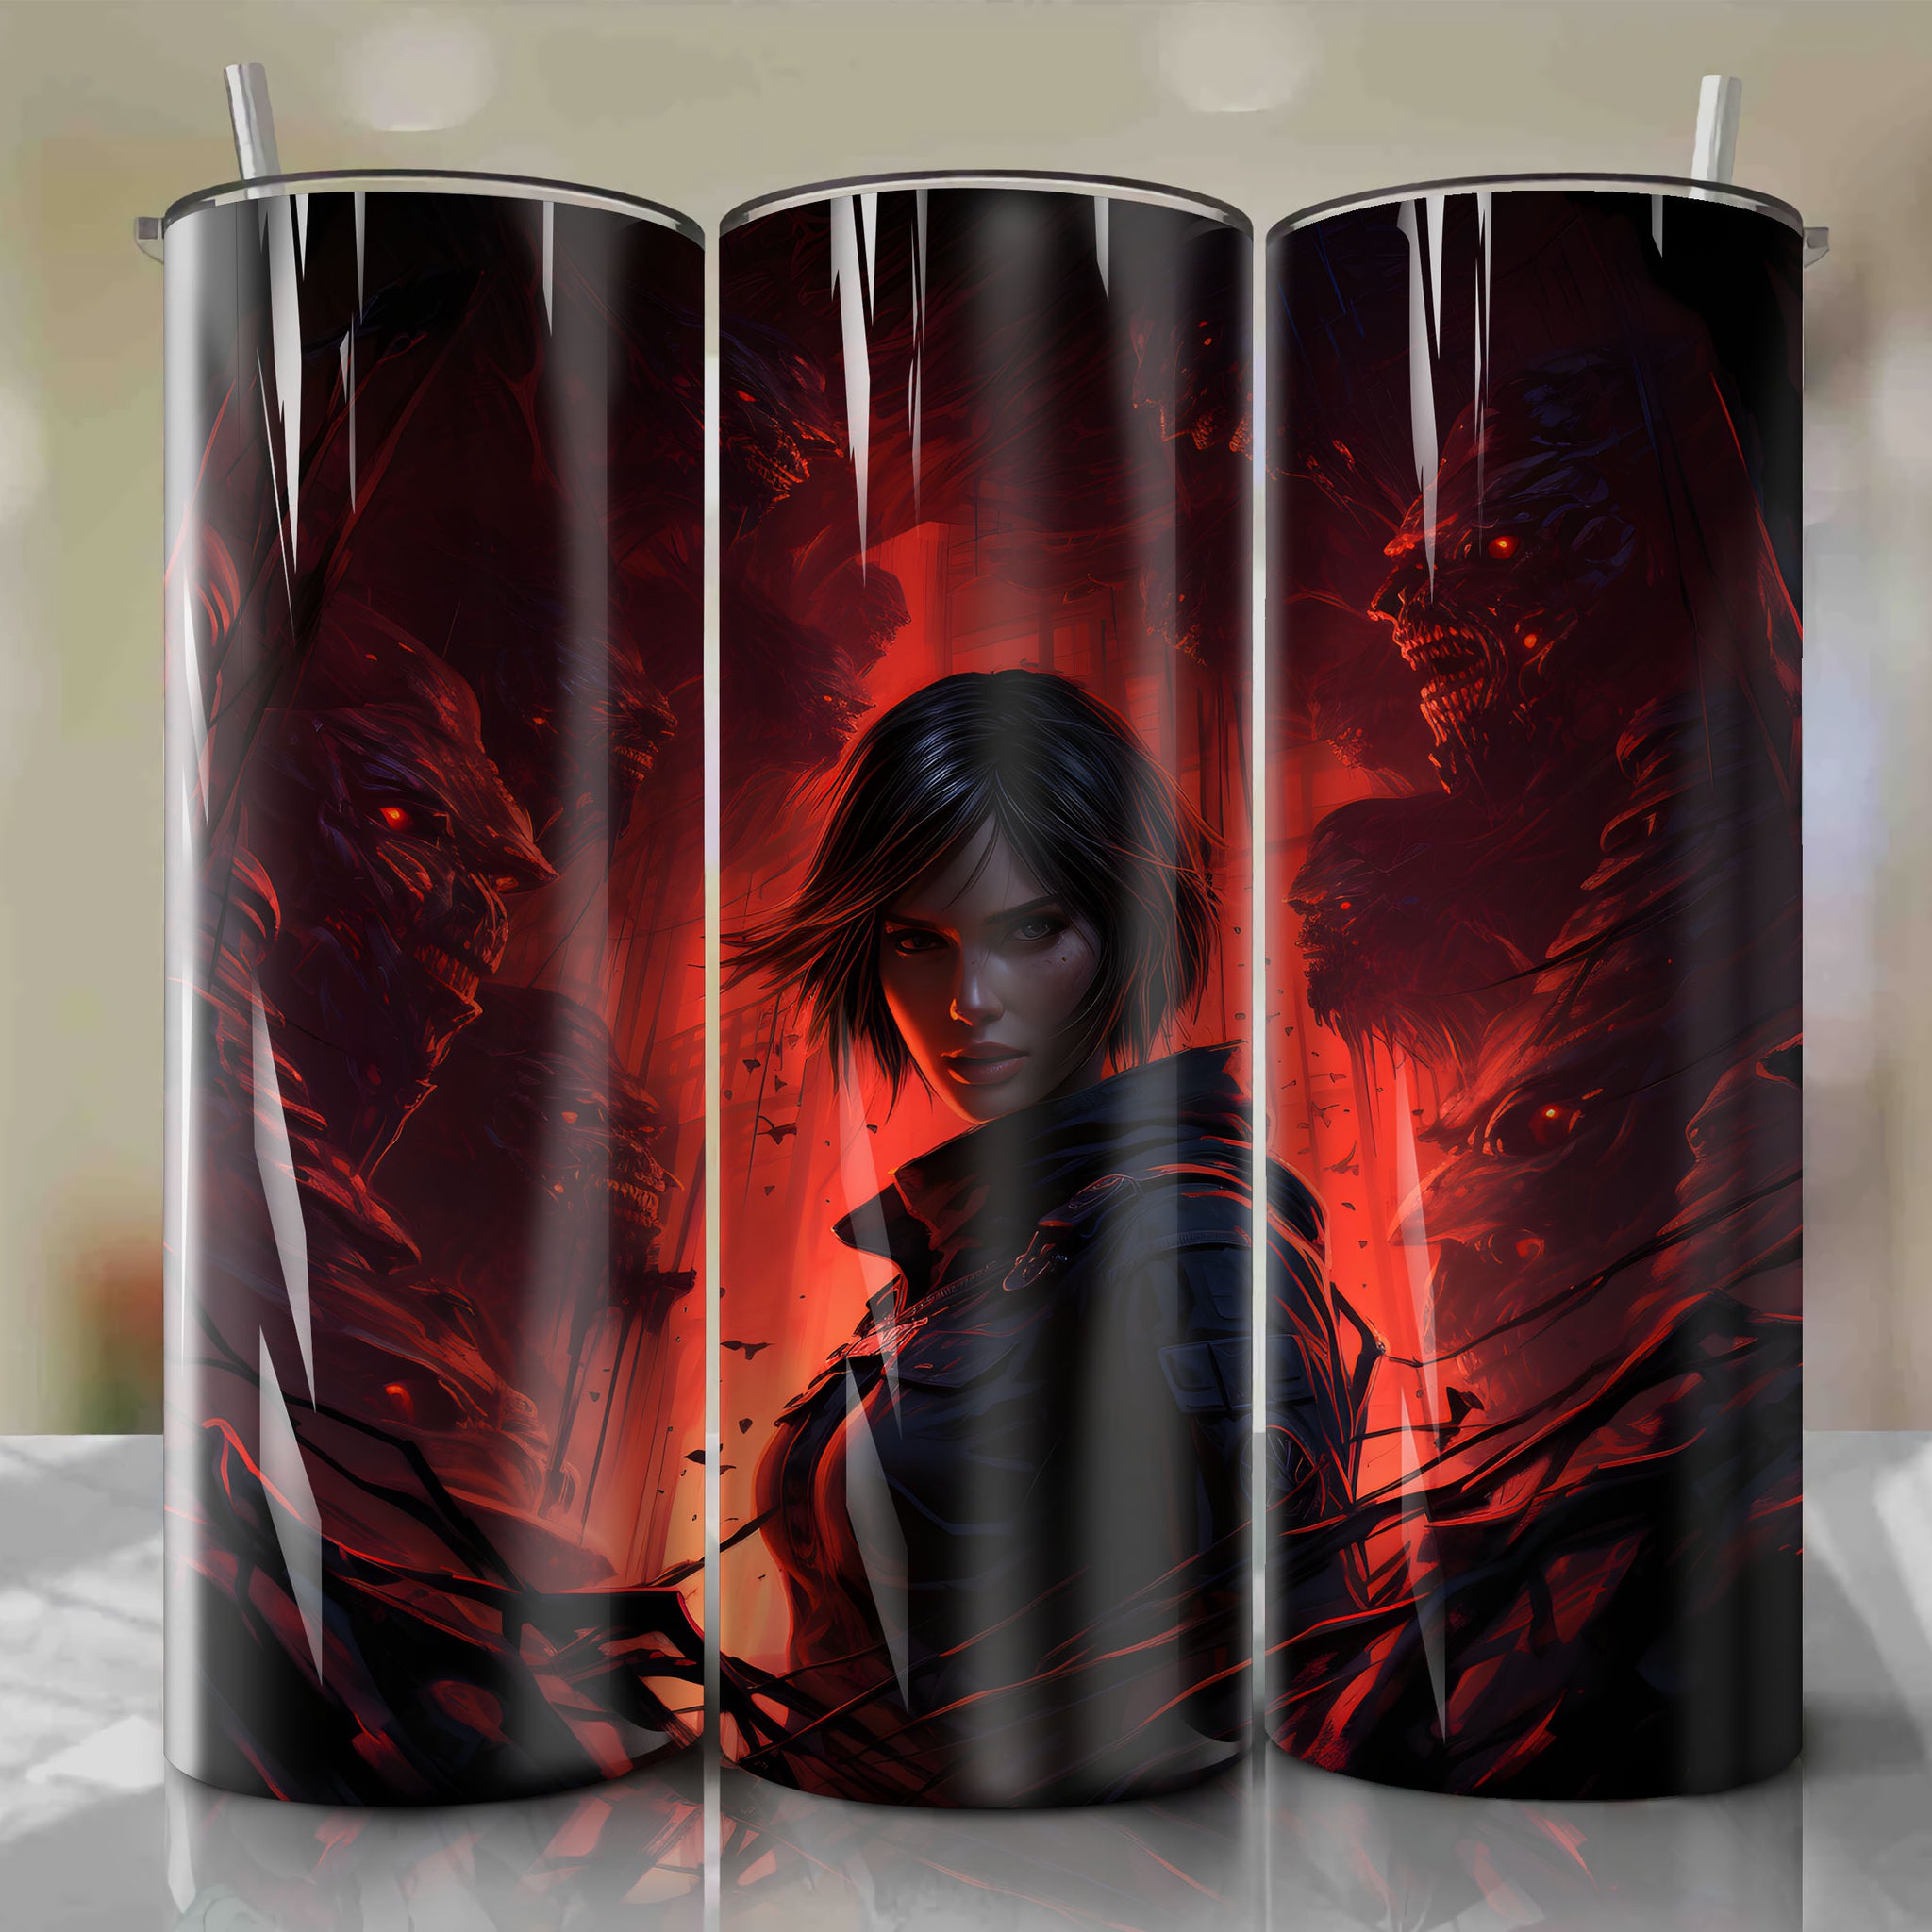 20 Oz Tumbler Wrap - Ada Wong from Resident Evil: Enigmatic Spy Emerges from Cracked Hole
